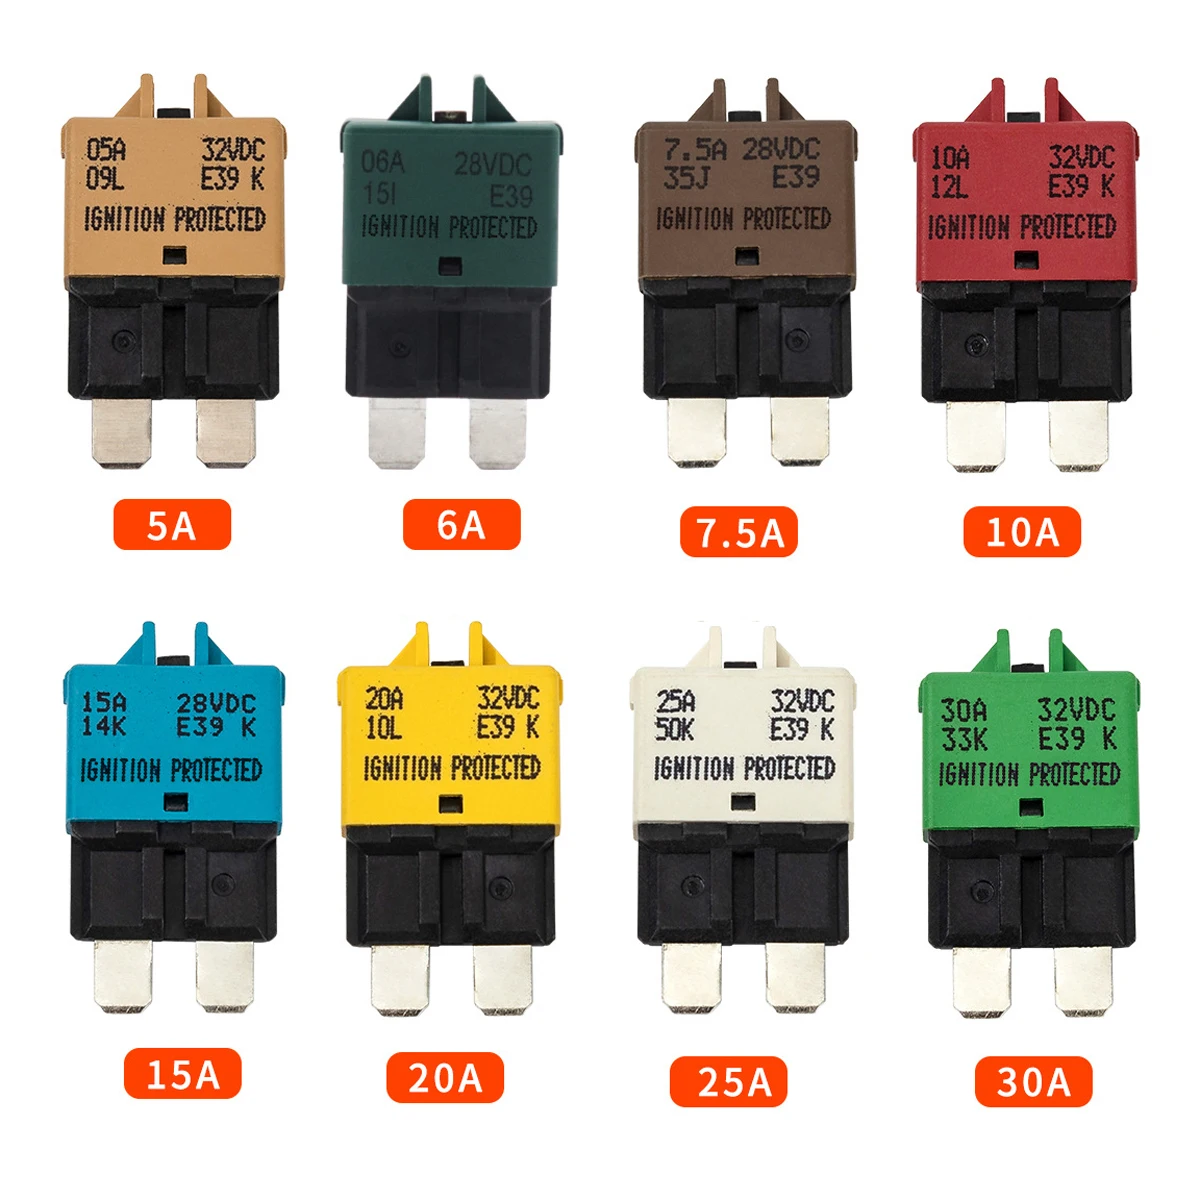 

8 Packs Fuse Circuit Breaker Low Profile ATC/ATO Manual Resettable Fuse 5A 6A 7.5A 10A 15A 20A 25A 30A (Mixed) 12V-32V